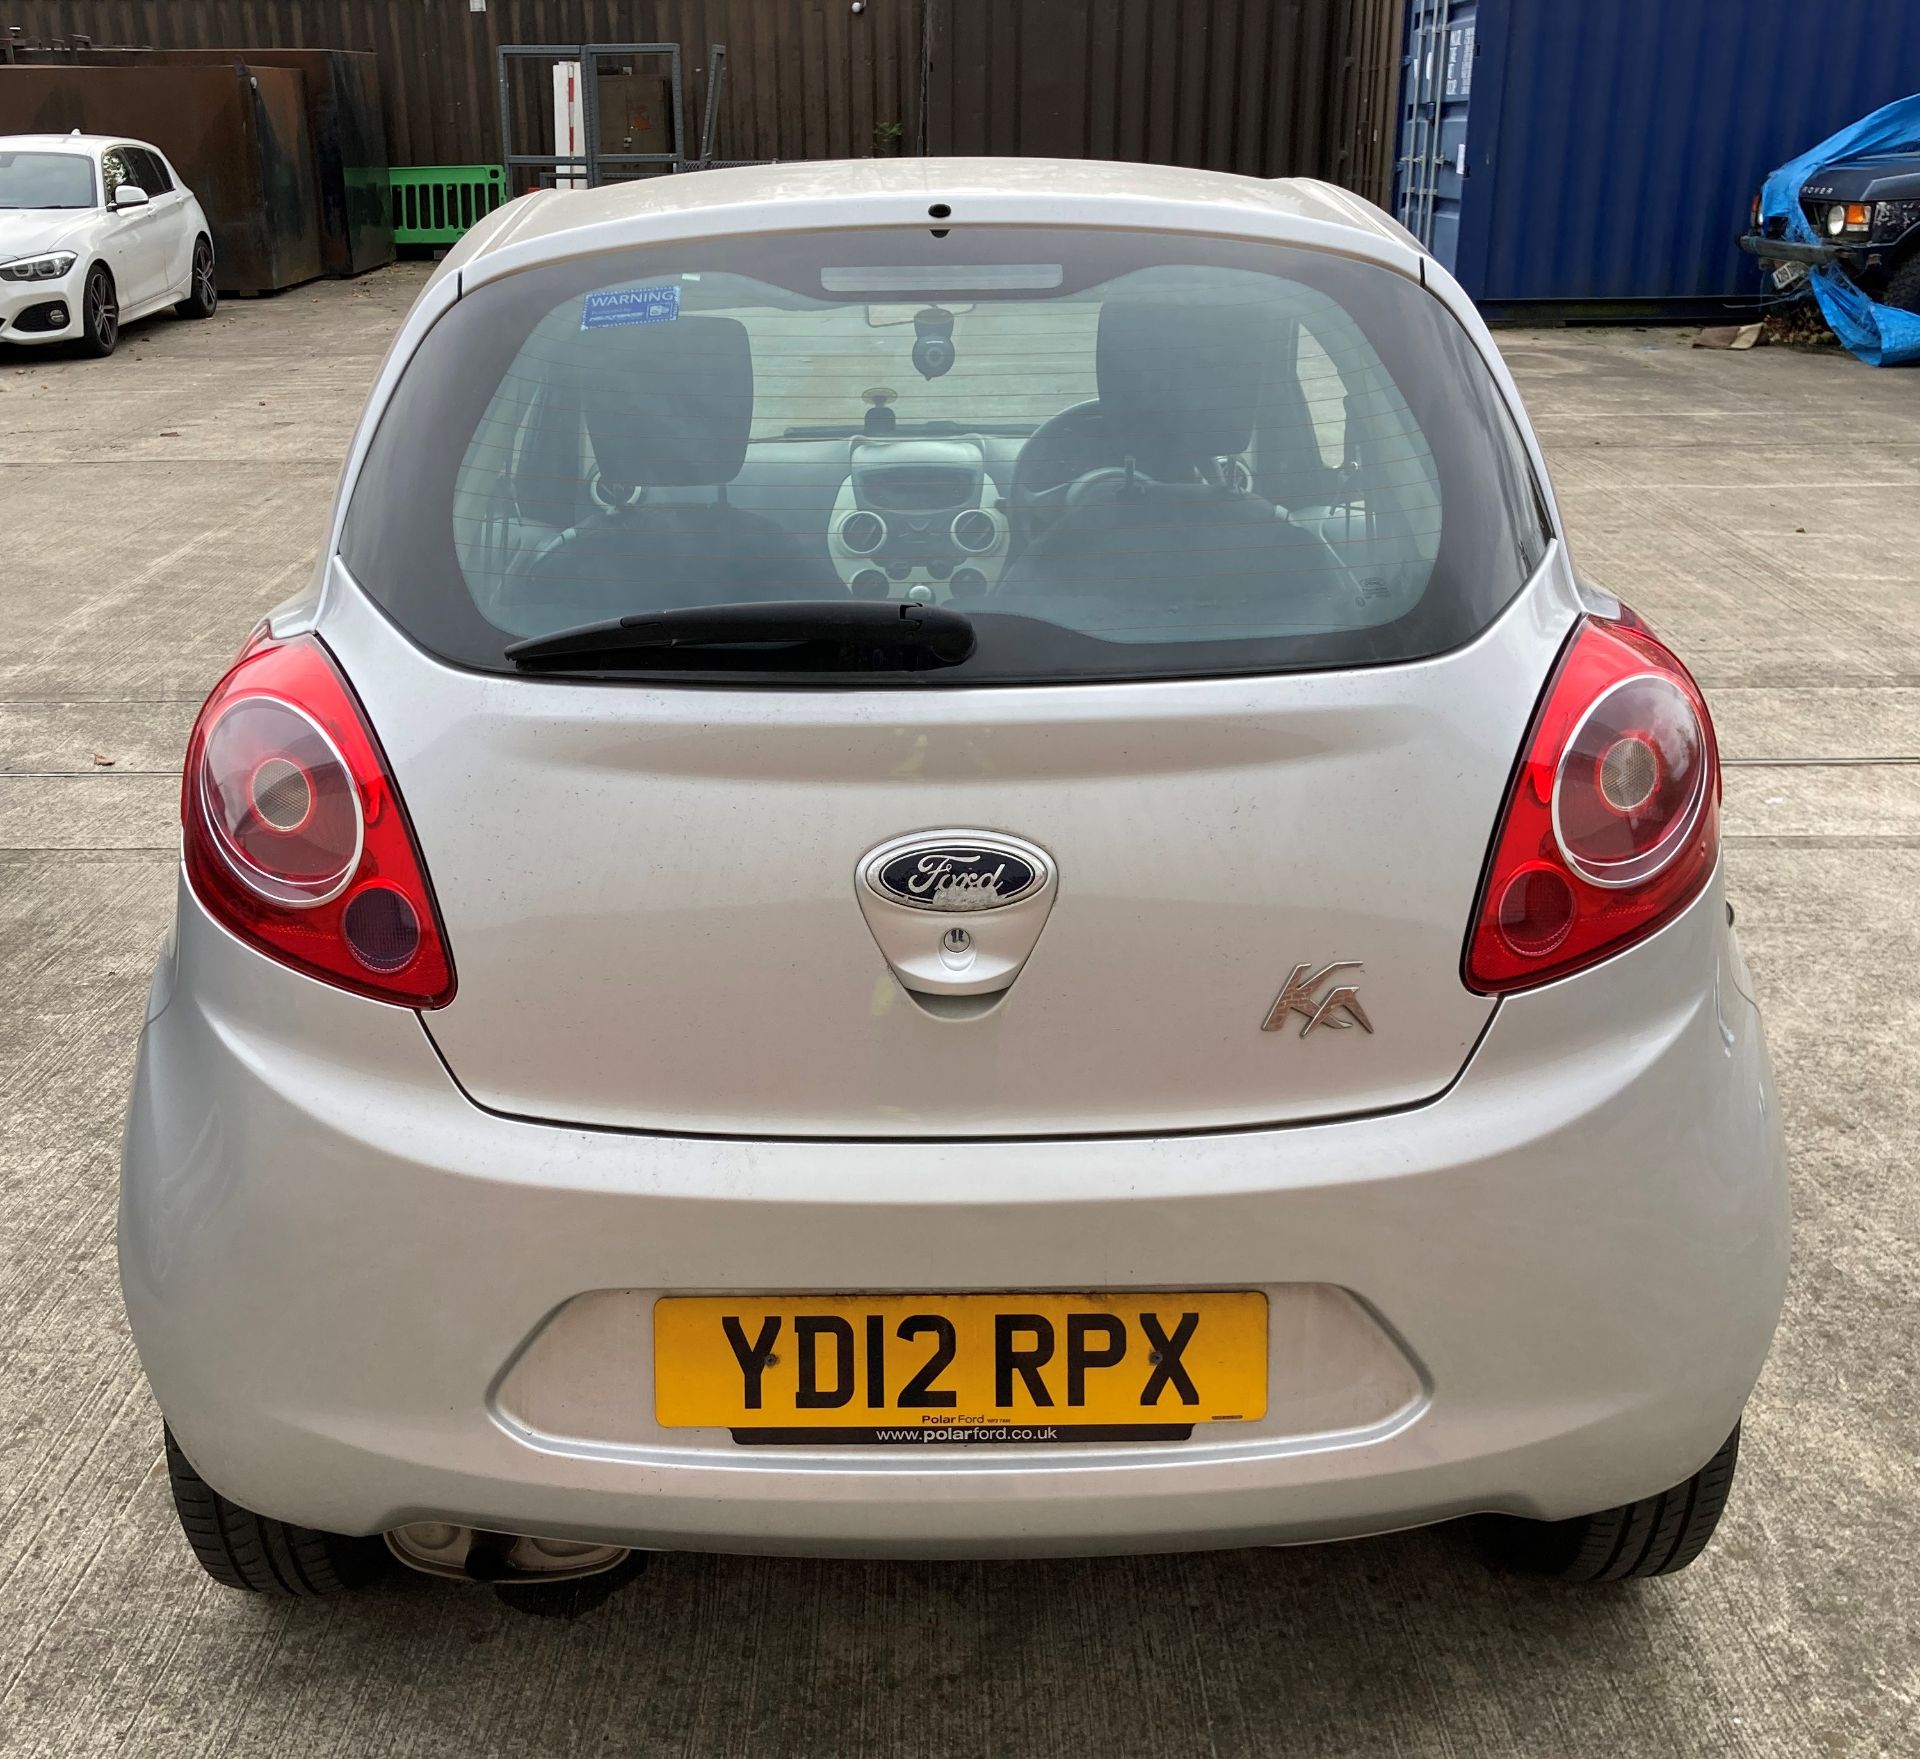 FORD KA EDGE 1.2 3 DOOR HATCHBACK - Petrol - Silver - Nextbase front and rear dashcams fitted. - Image 4 of 12